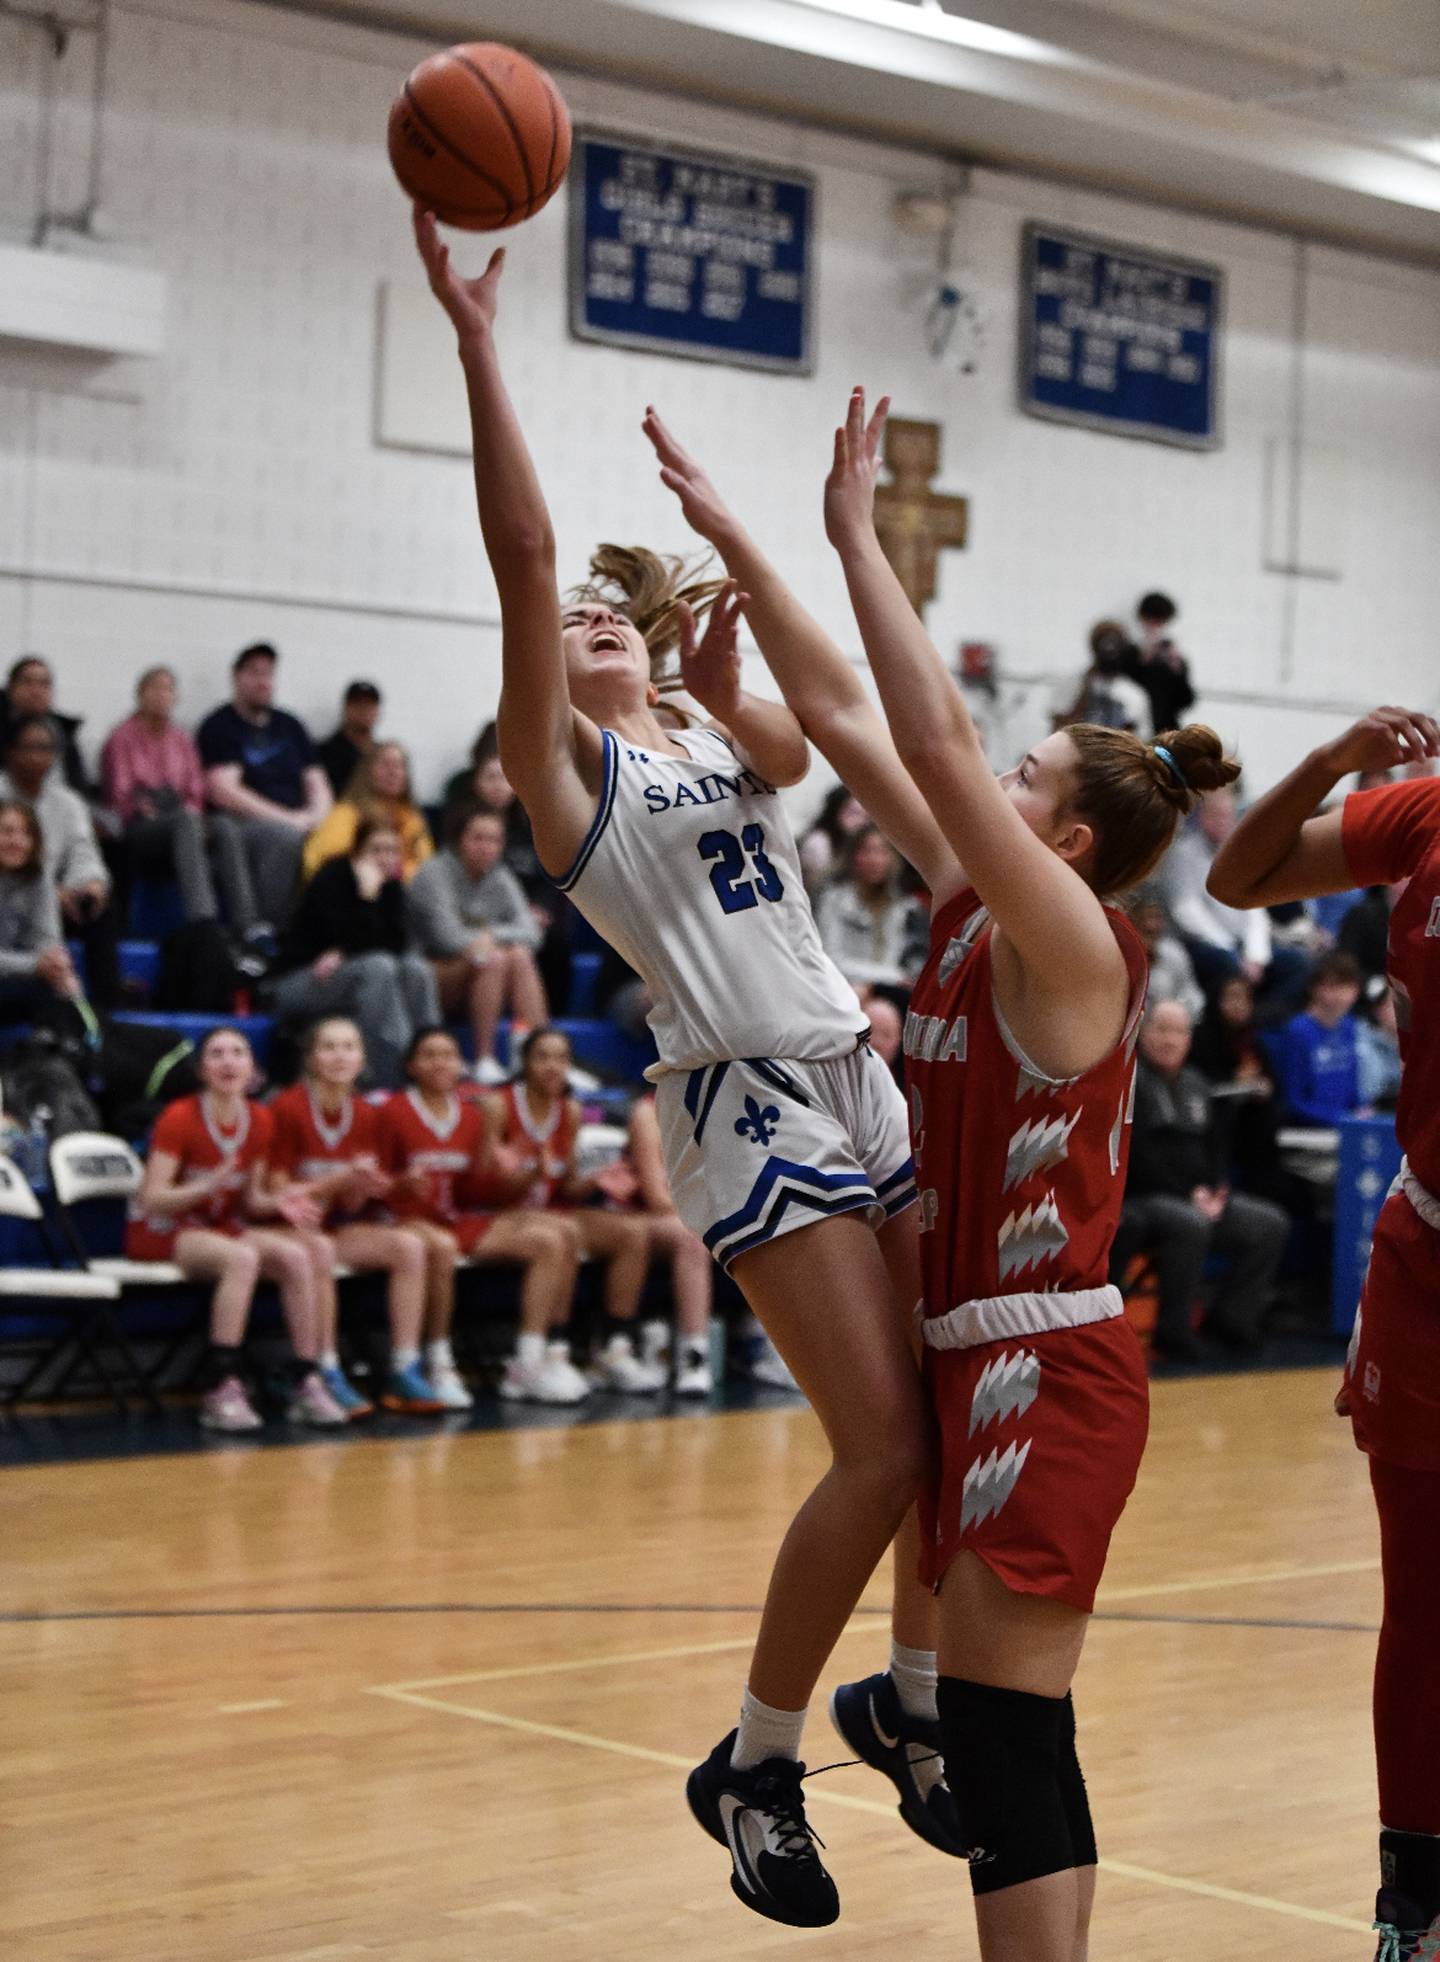 St. Mary's Bailey Harris puts up a shot as Concordia Prep's Hailee Ford defends during Wednesday's IAAM B Conference girls basketball contest. The No. 9 Saints gained sole possession of first place in the IAAM B with a 46-39 victory in Annapolis.